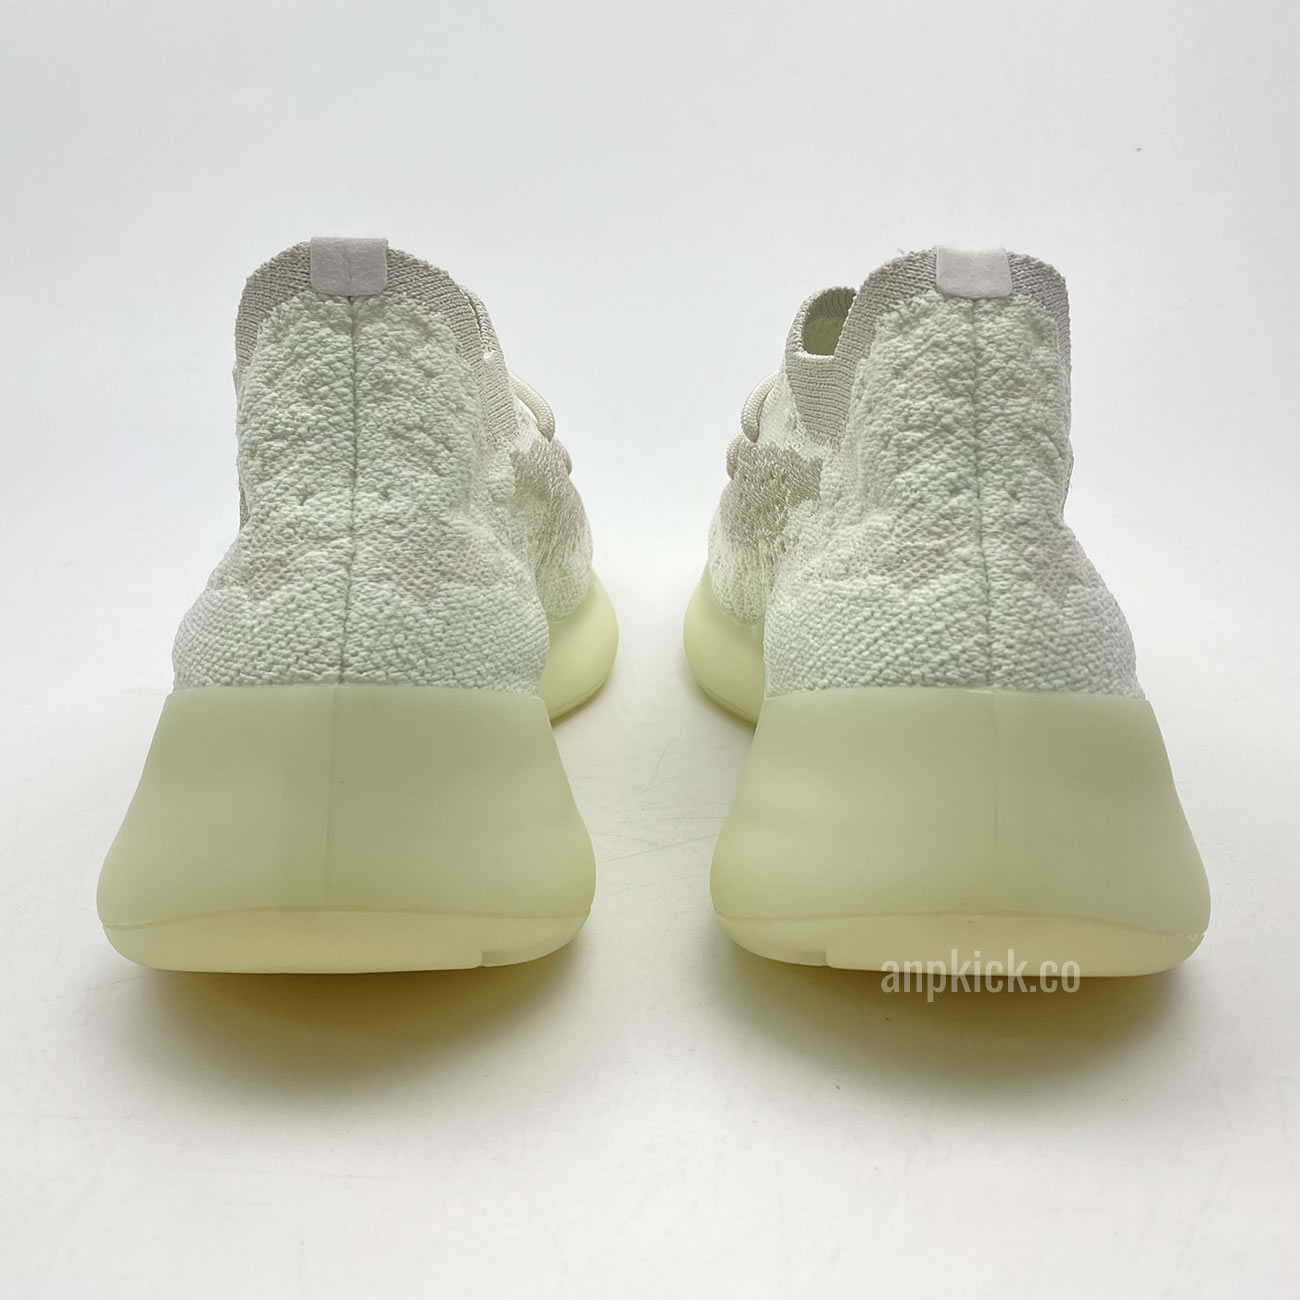 adidas Yeezy Boost 380 "Calcite Glow" Release Date GZ8668